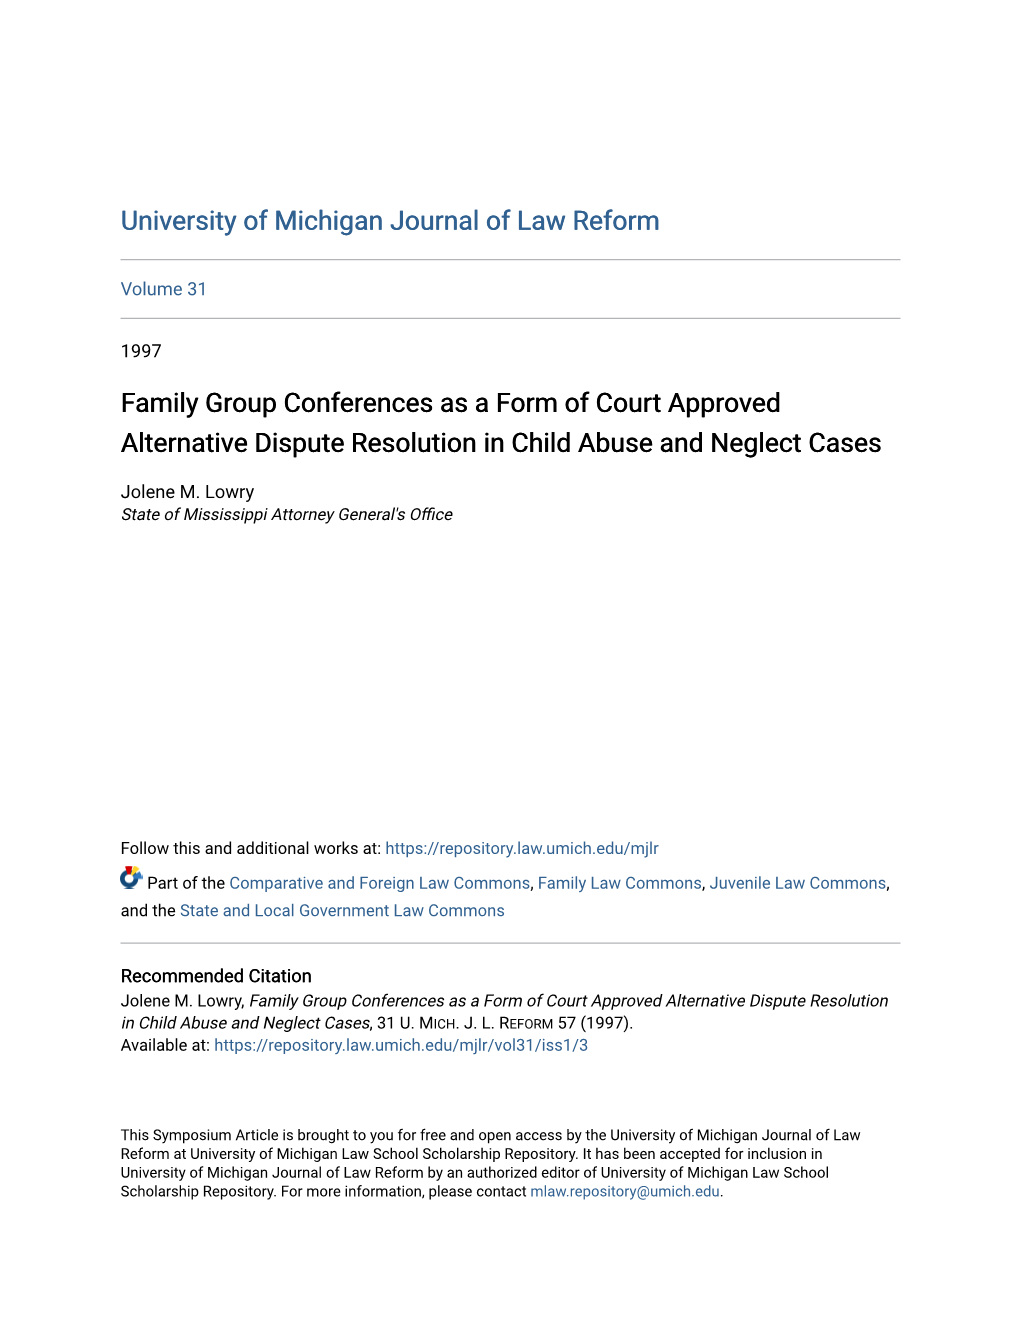 Family Group Conferences As a Form of Court Approved Alternative Dispute Resolution in Child Abuse and Neglect Cases